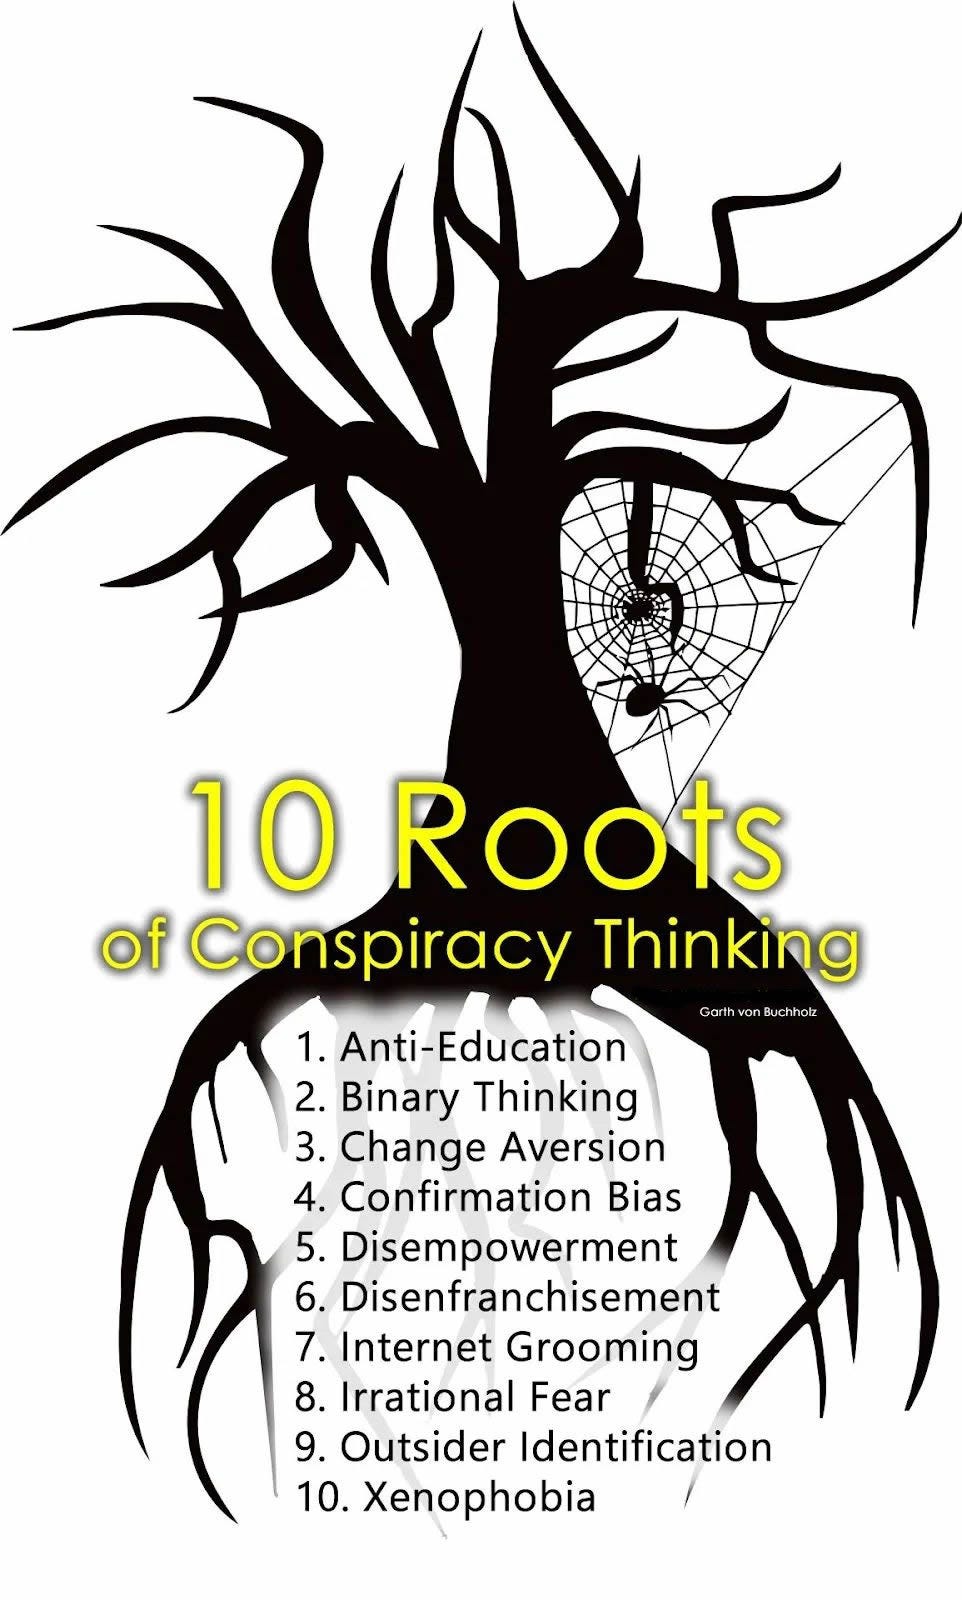 List of 10 Roots of Conspiracy Thinking